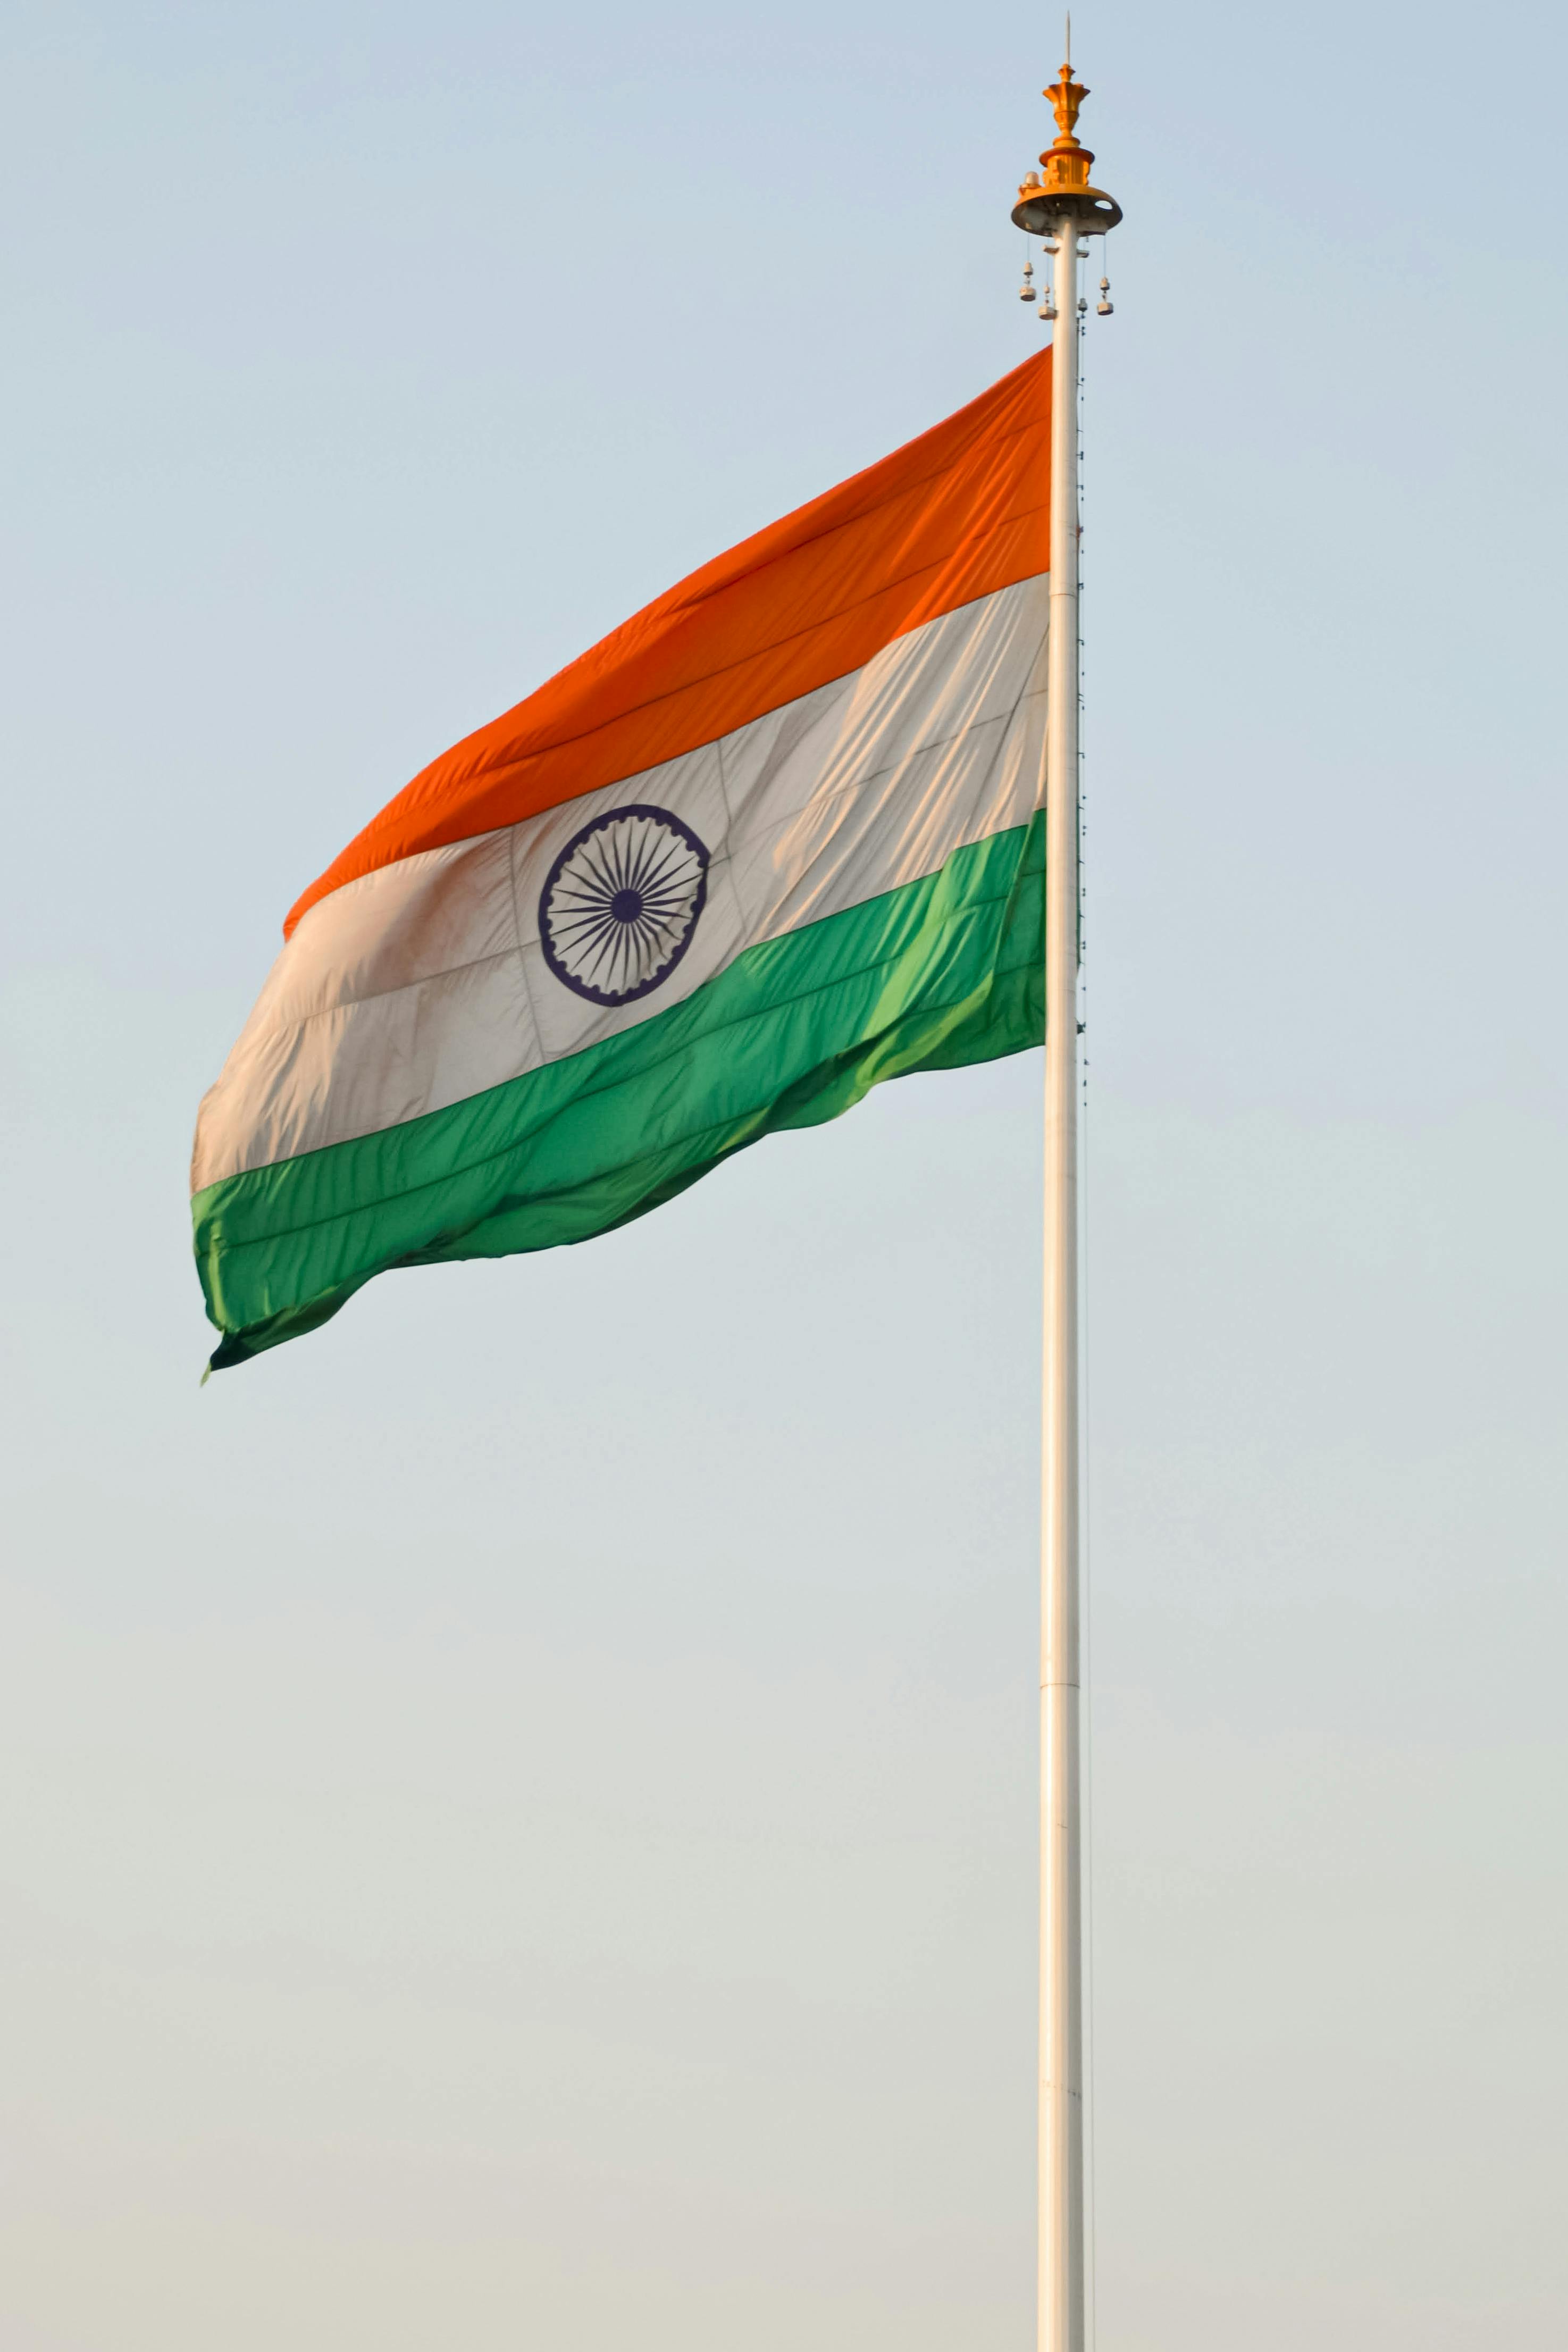 Indian Flag Motion Background Stock Video Footage for Free Download